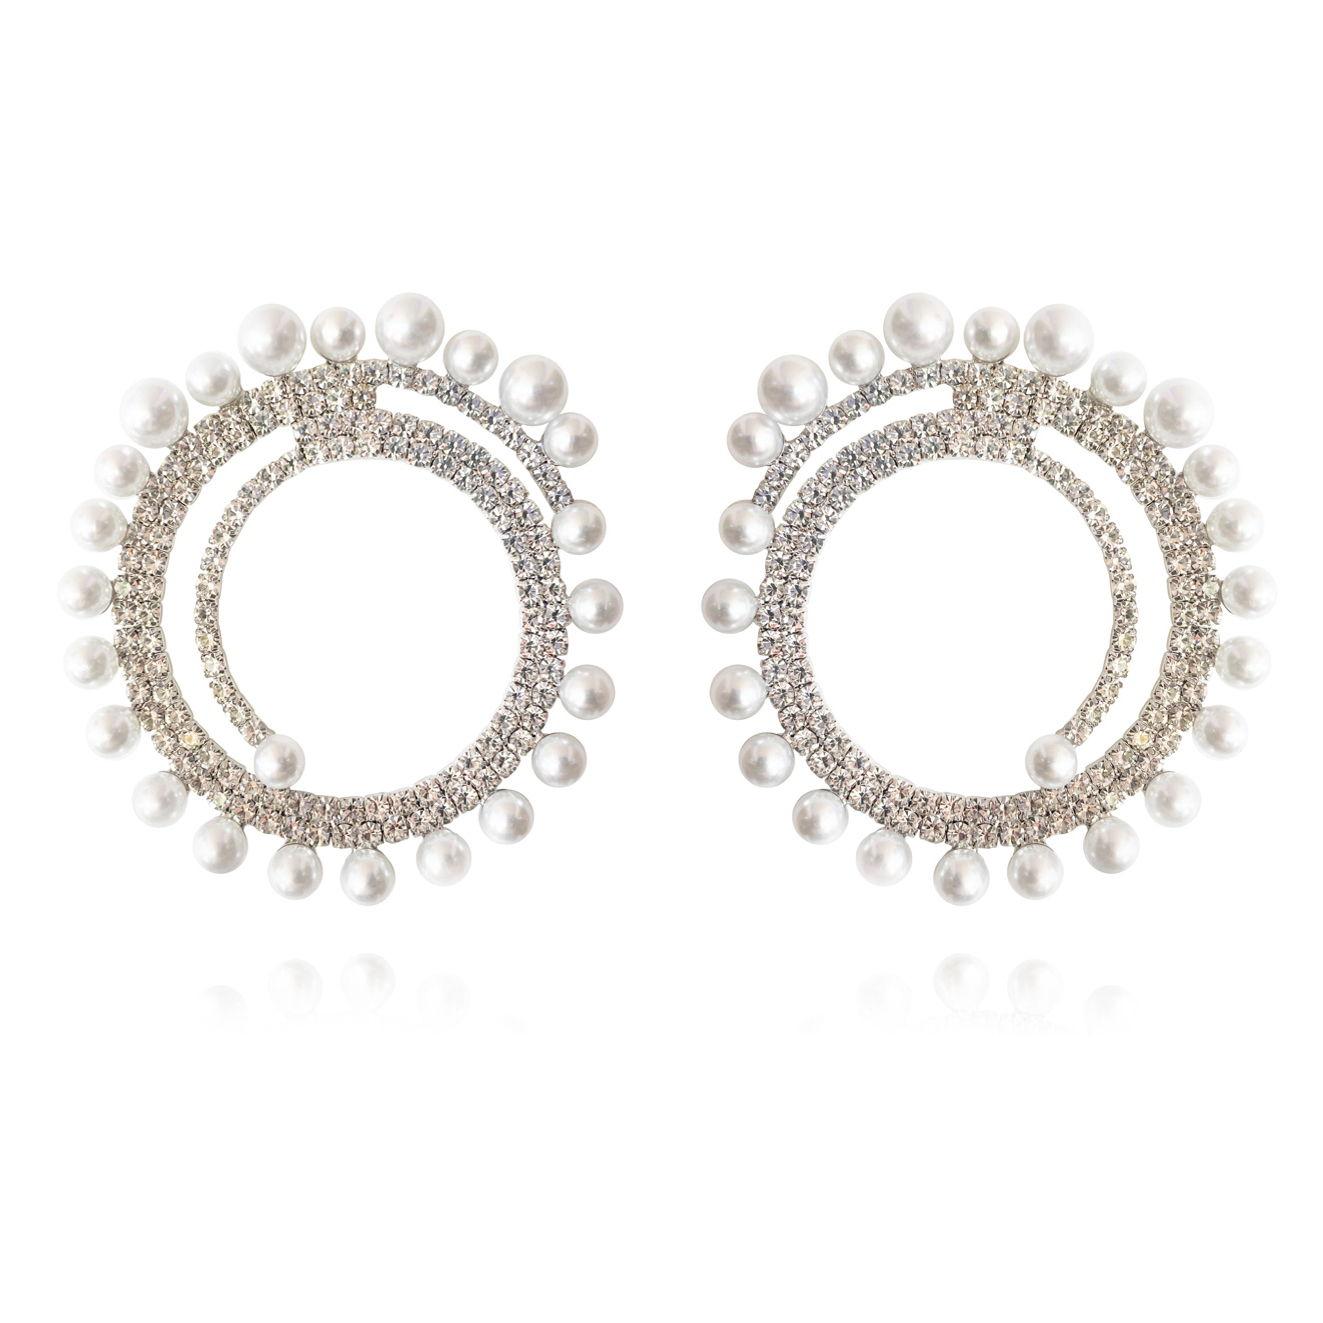 Details more than 132 pearl and diamante earrings latest